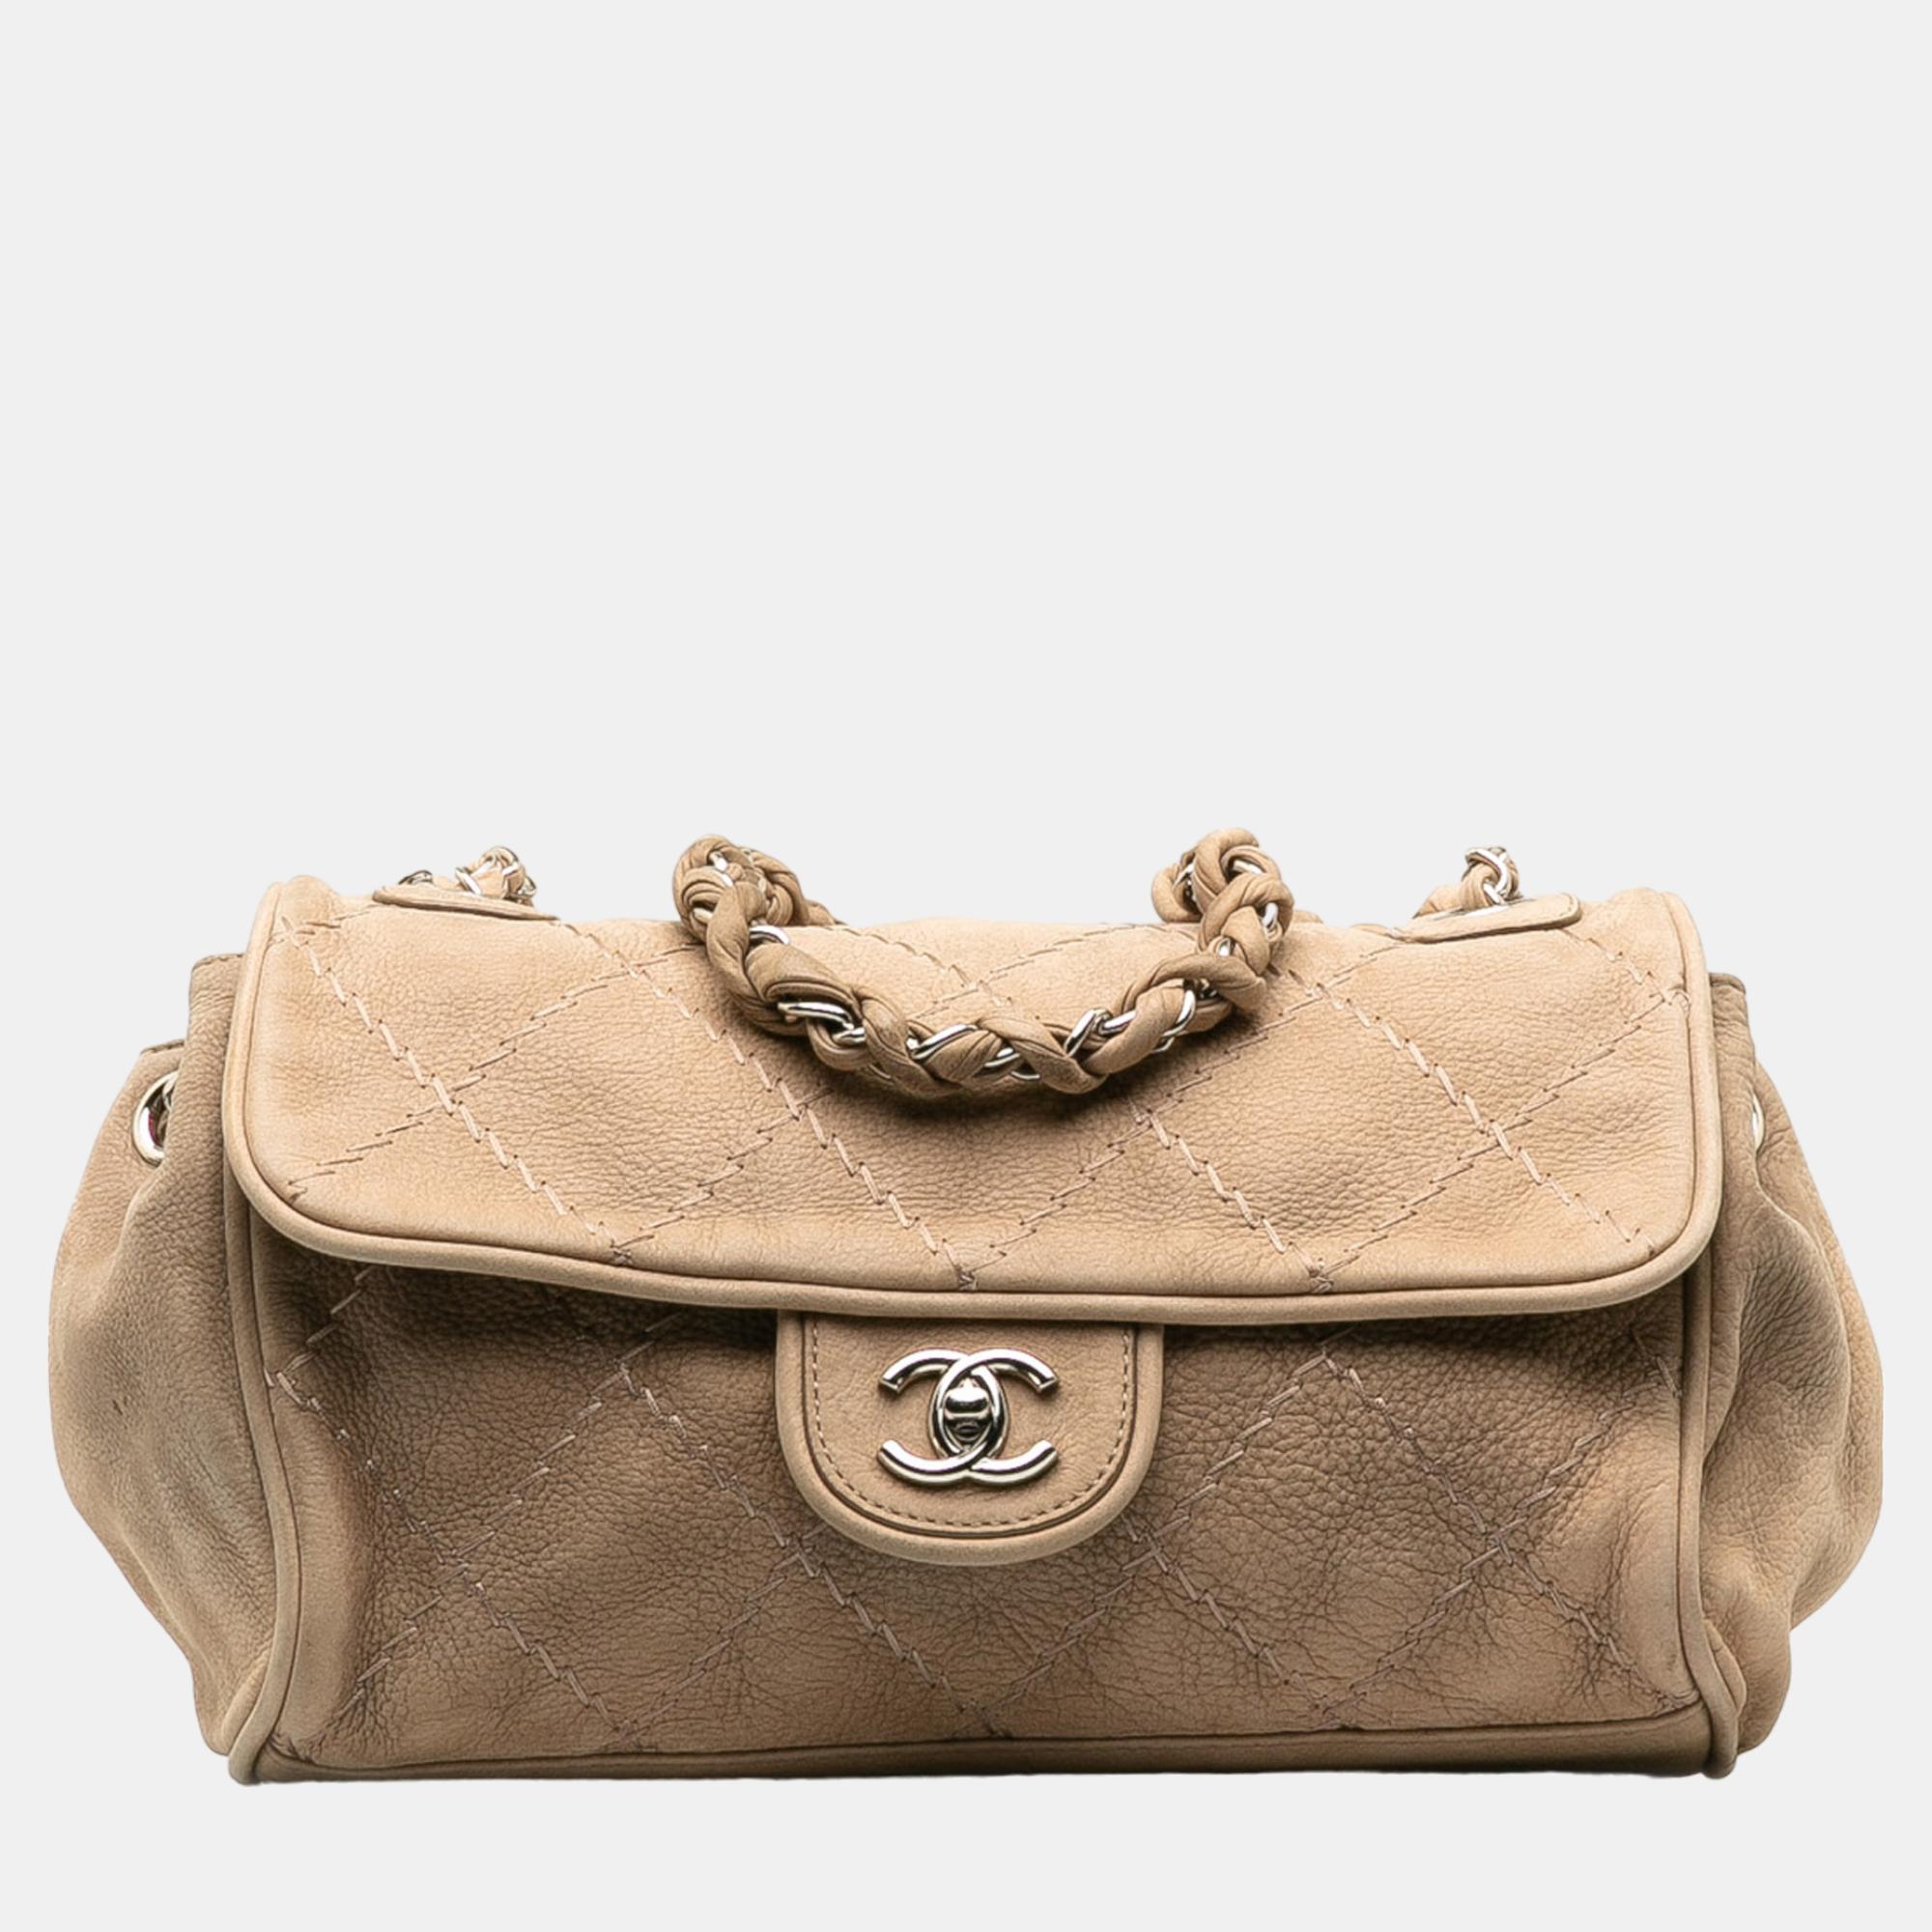 This shoulder bag features a leather body leather woven chain straps a front flap with CC twist lock closure an exterior slip pocket and interior zip and slip pockets.